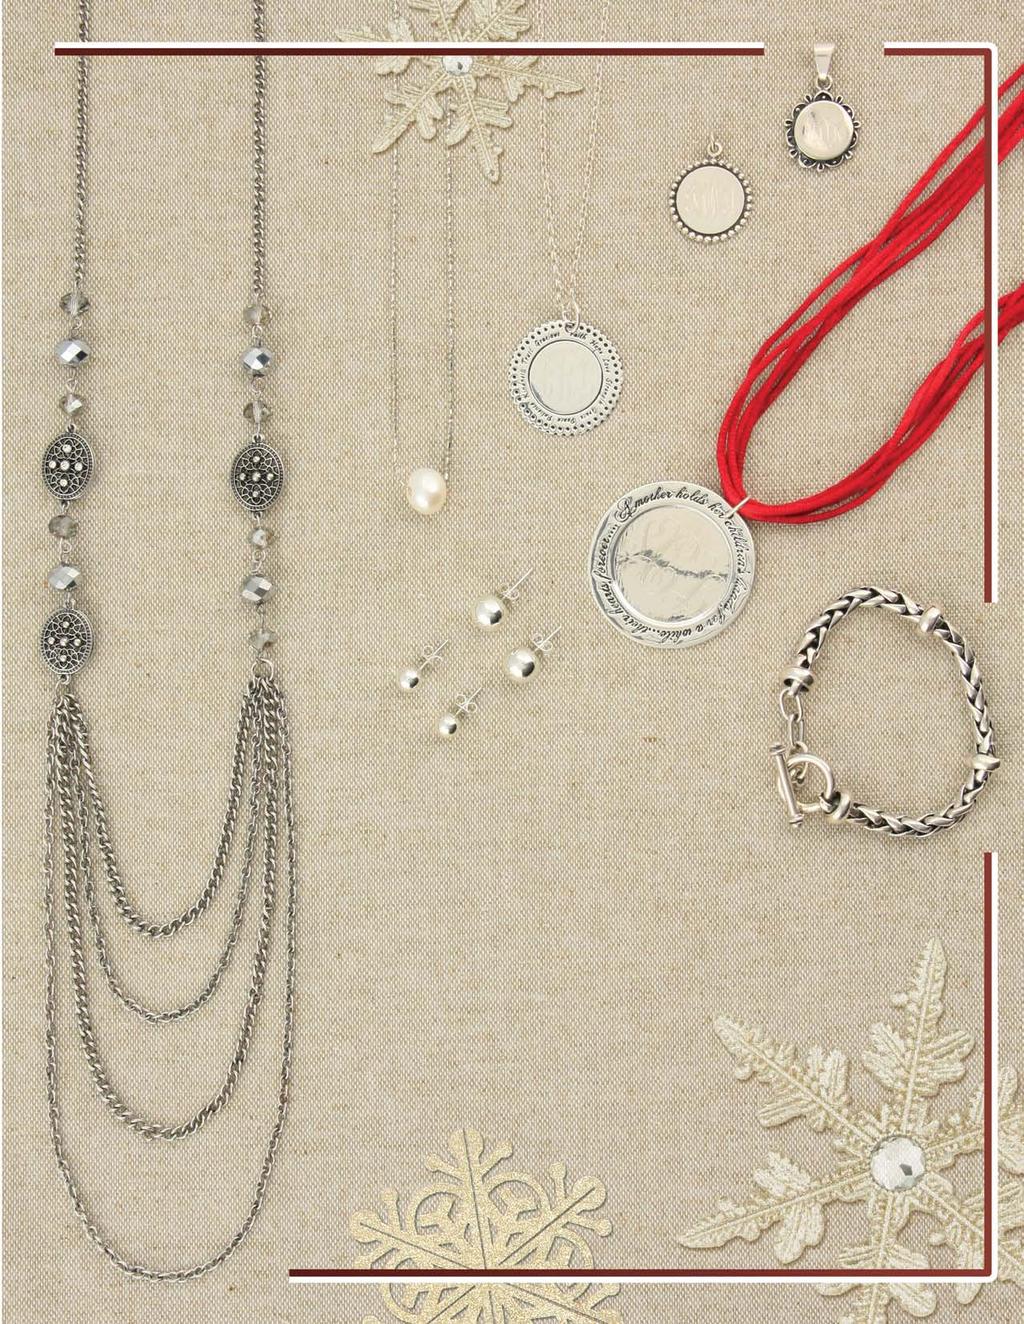 e. d. a. b. c. h. g. f. i. Classic Styles a. JN0516 $29 Vintage ovals accent necklace and earring set b. JN0481 $21 Single 10mm freshwater pearl on silver chain measuring 16 1/2 c.